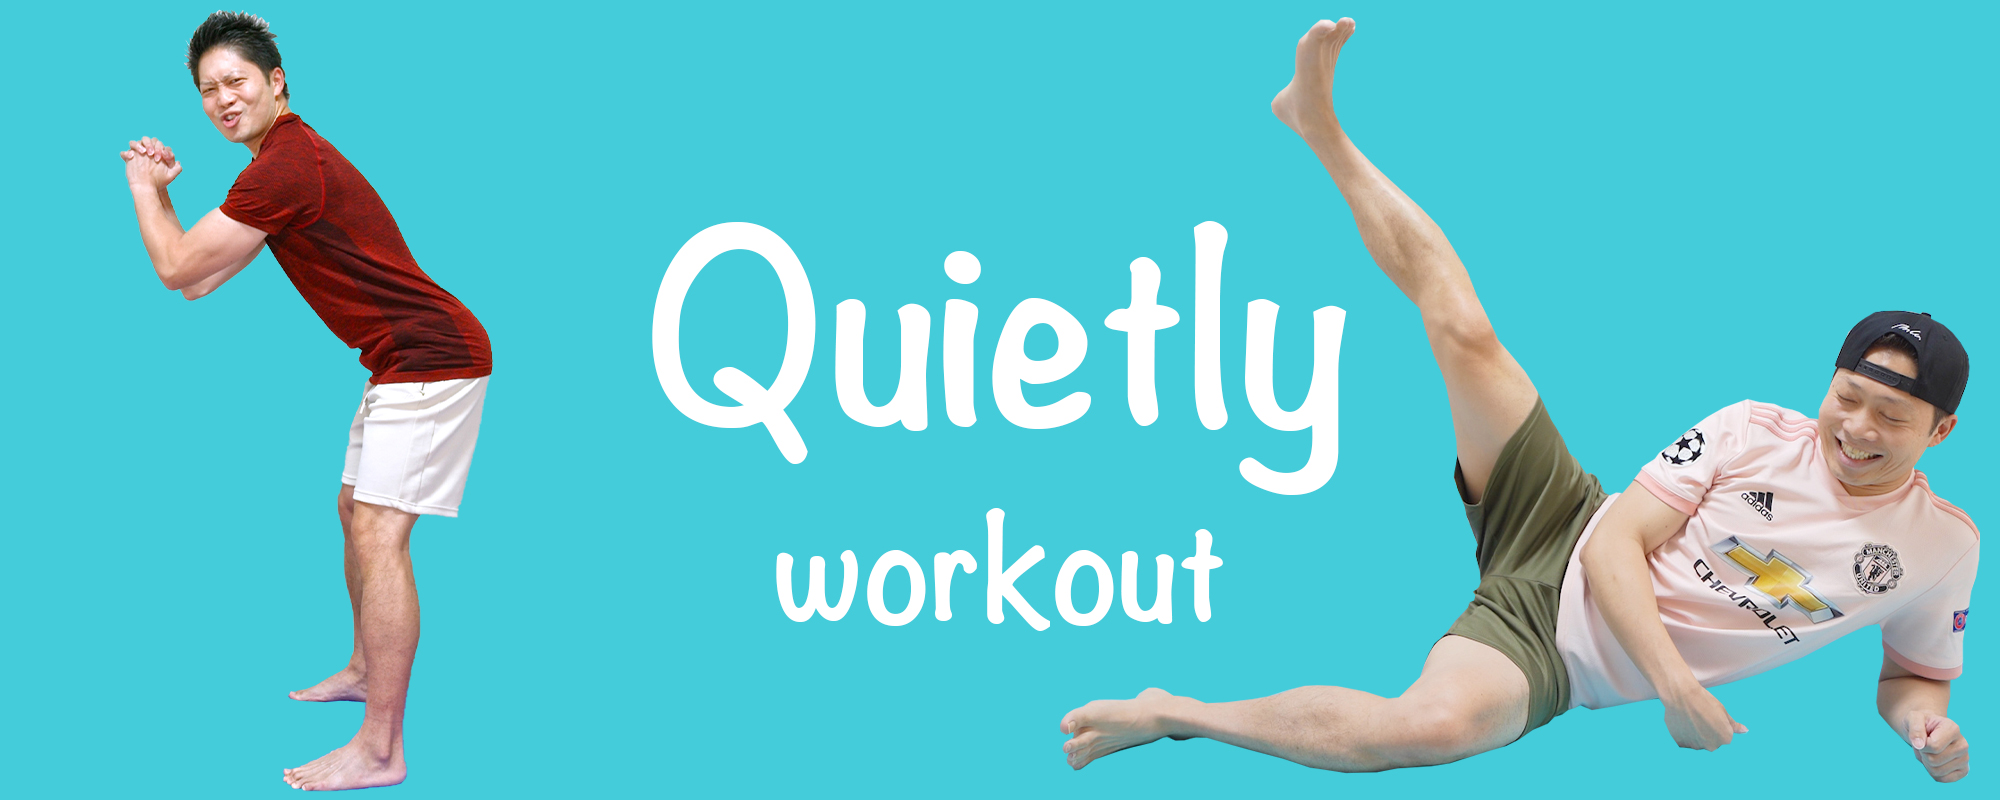 Quietly workout 4 weeks program